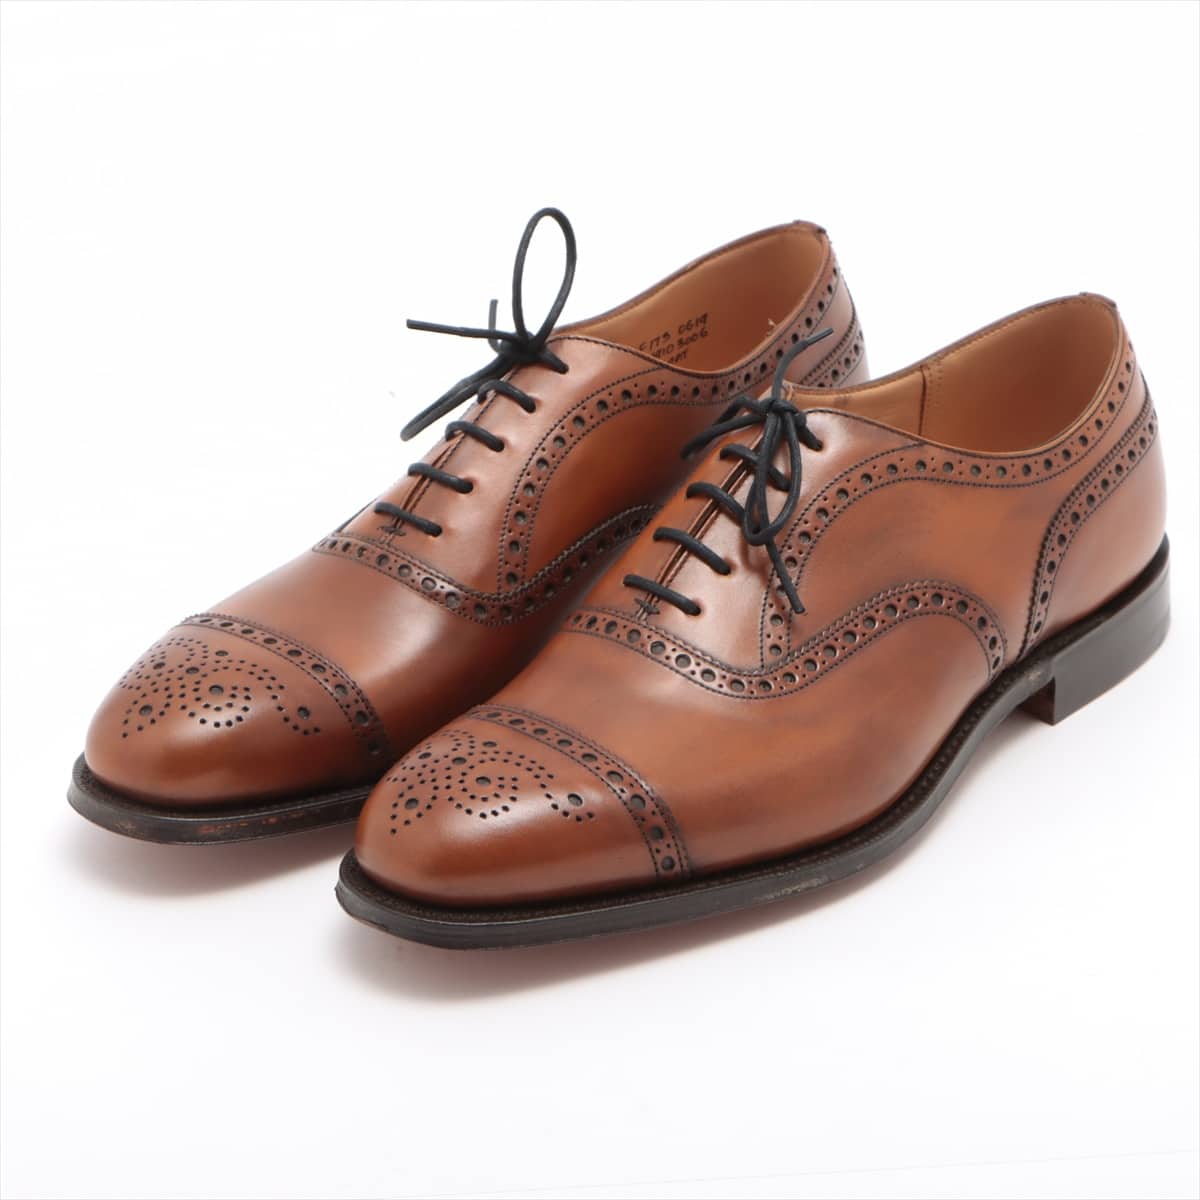 Church's Diplomat Leather Shoes 80F Men's Brown wingtip